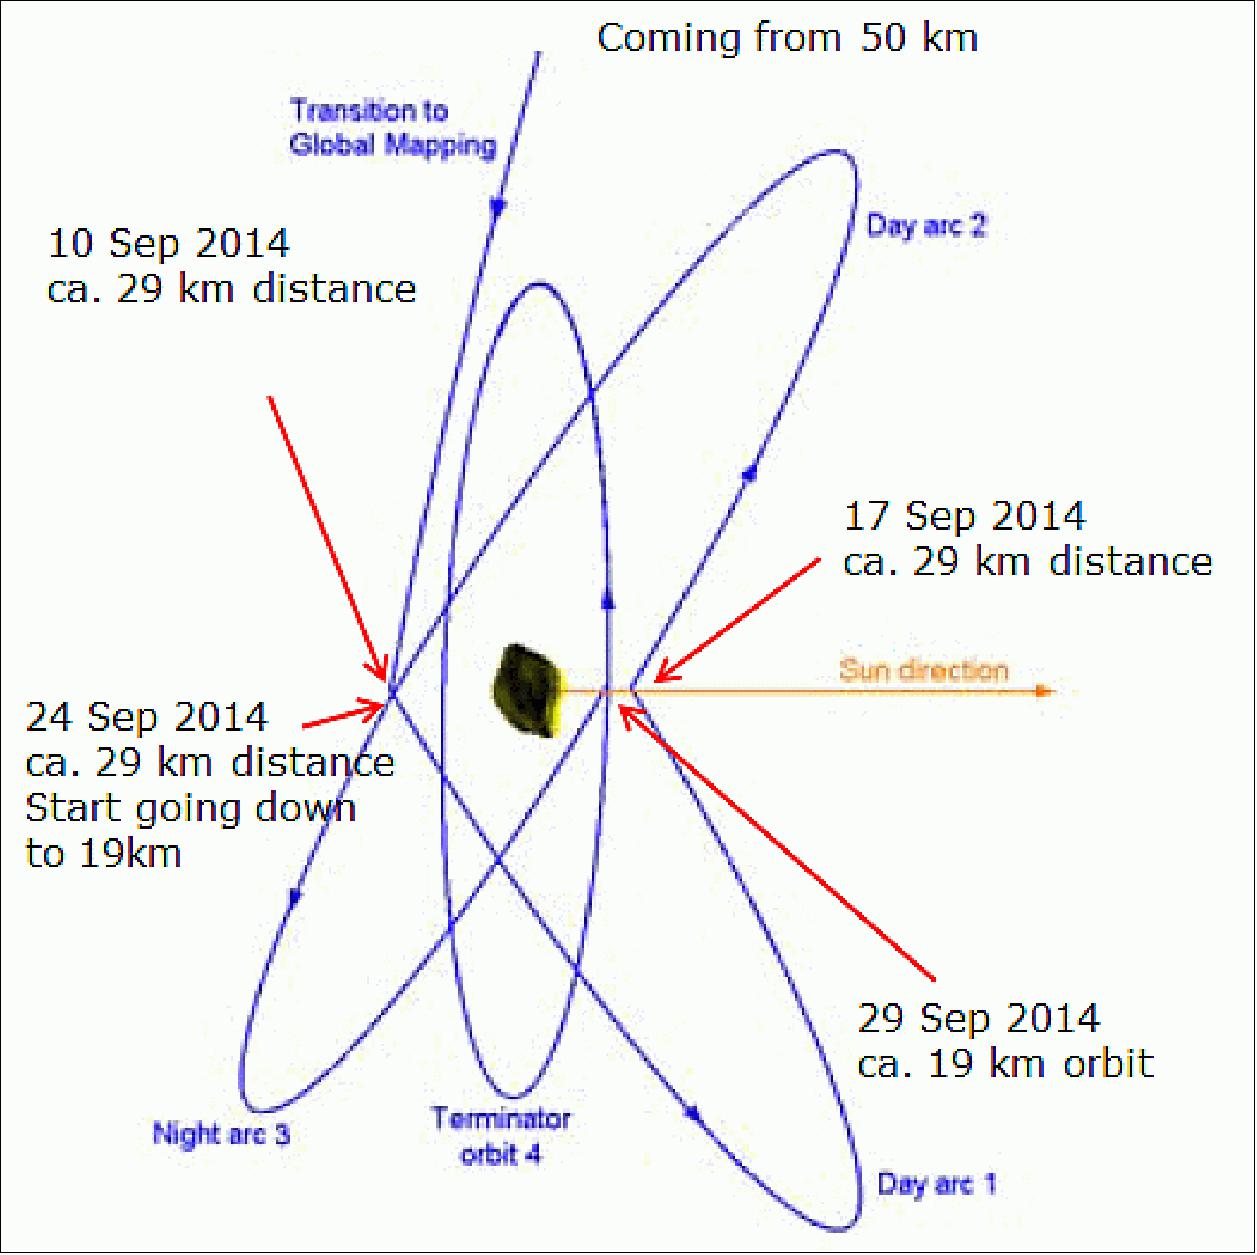 Figure 174: Global mapping and close observation orbits (image credit: ESA/ESOC)